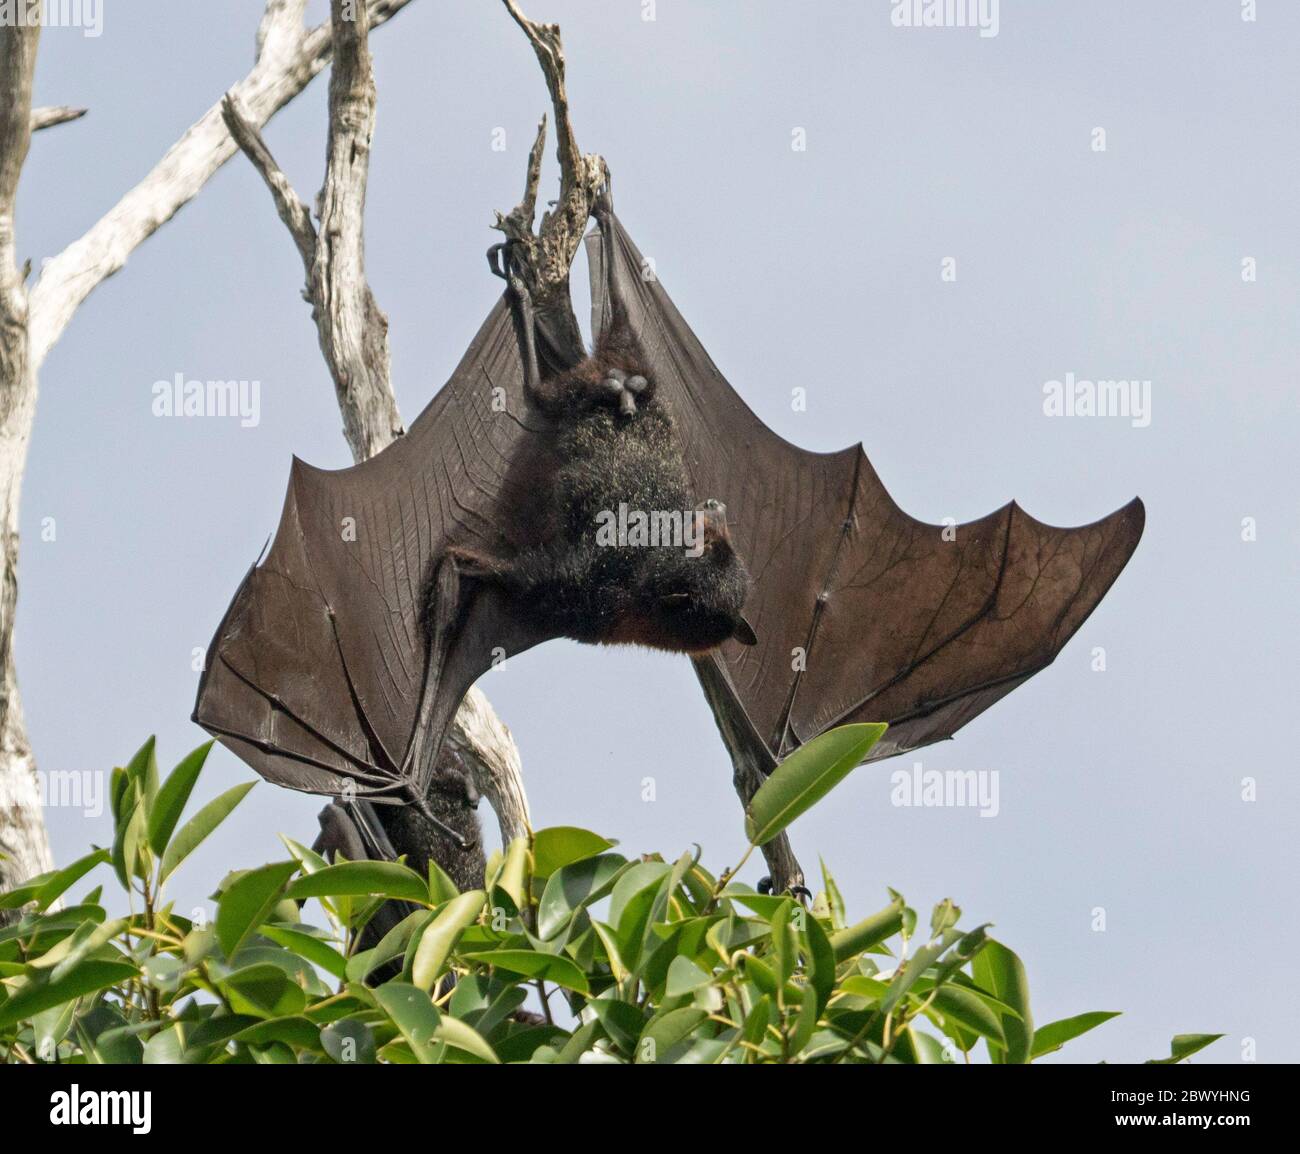 Australian grey-headed flying fox / fruit bat, Pteropus poliocephalus, hanging from branch of tree with wings extended and ready for flight Stock Photo